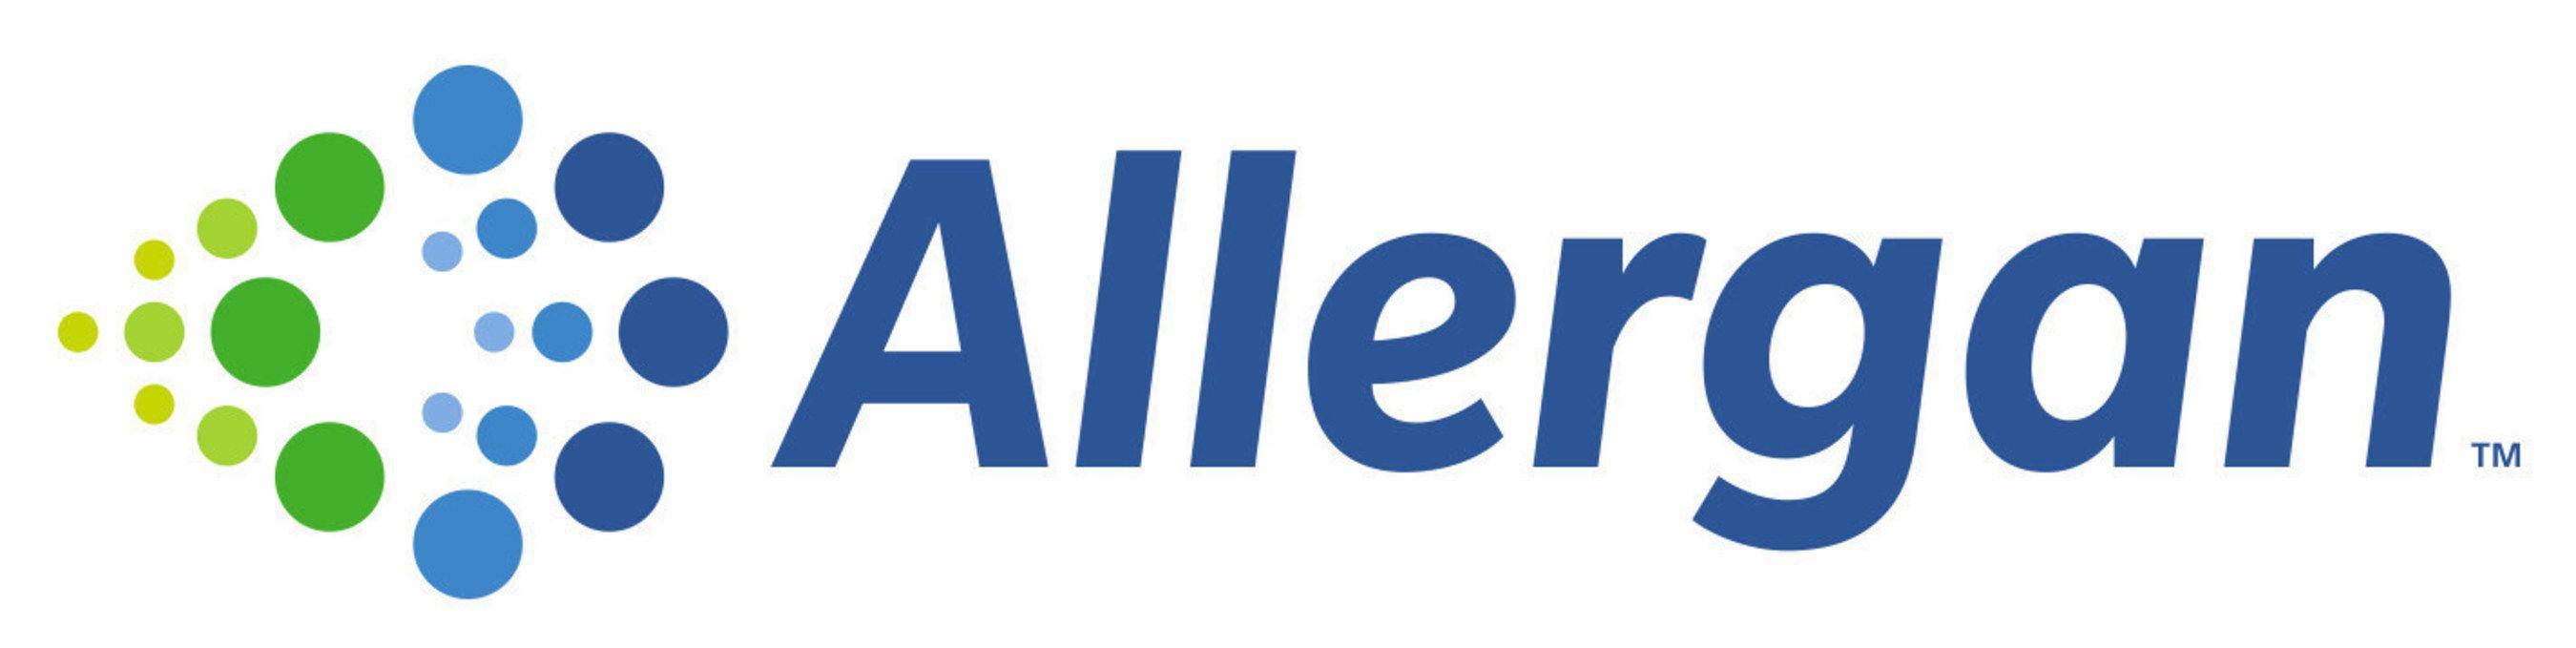 Crestor Logo - Allergan Receives FDA Approval and Launches First Generic Version of ...